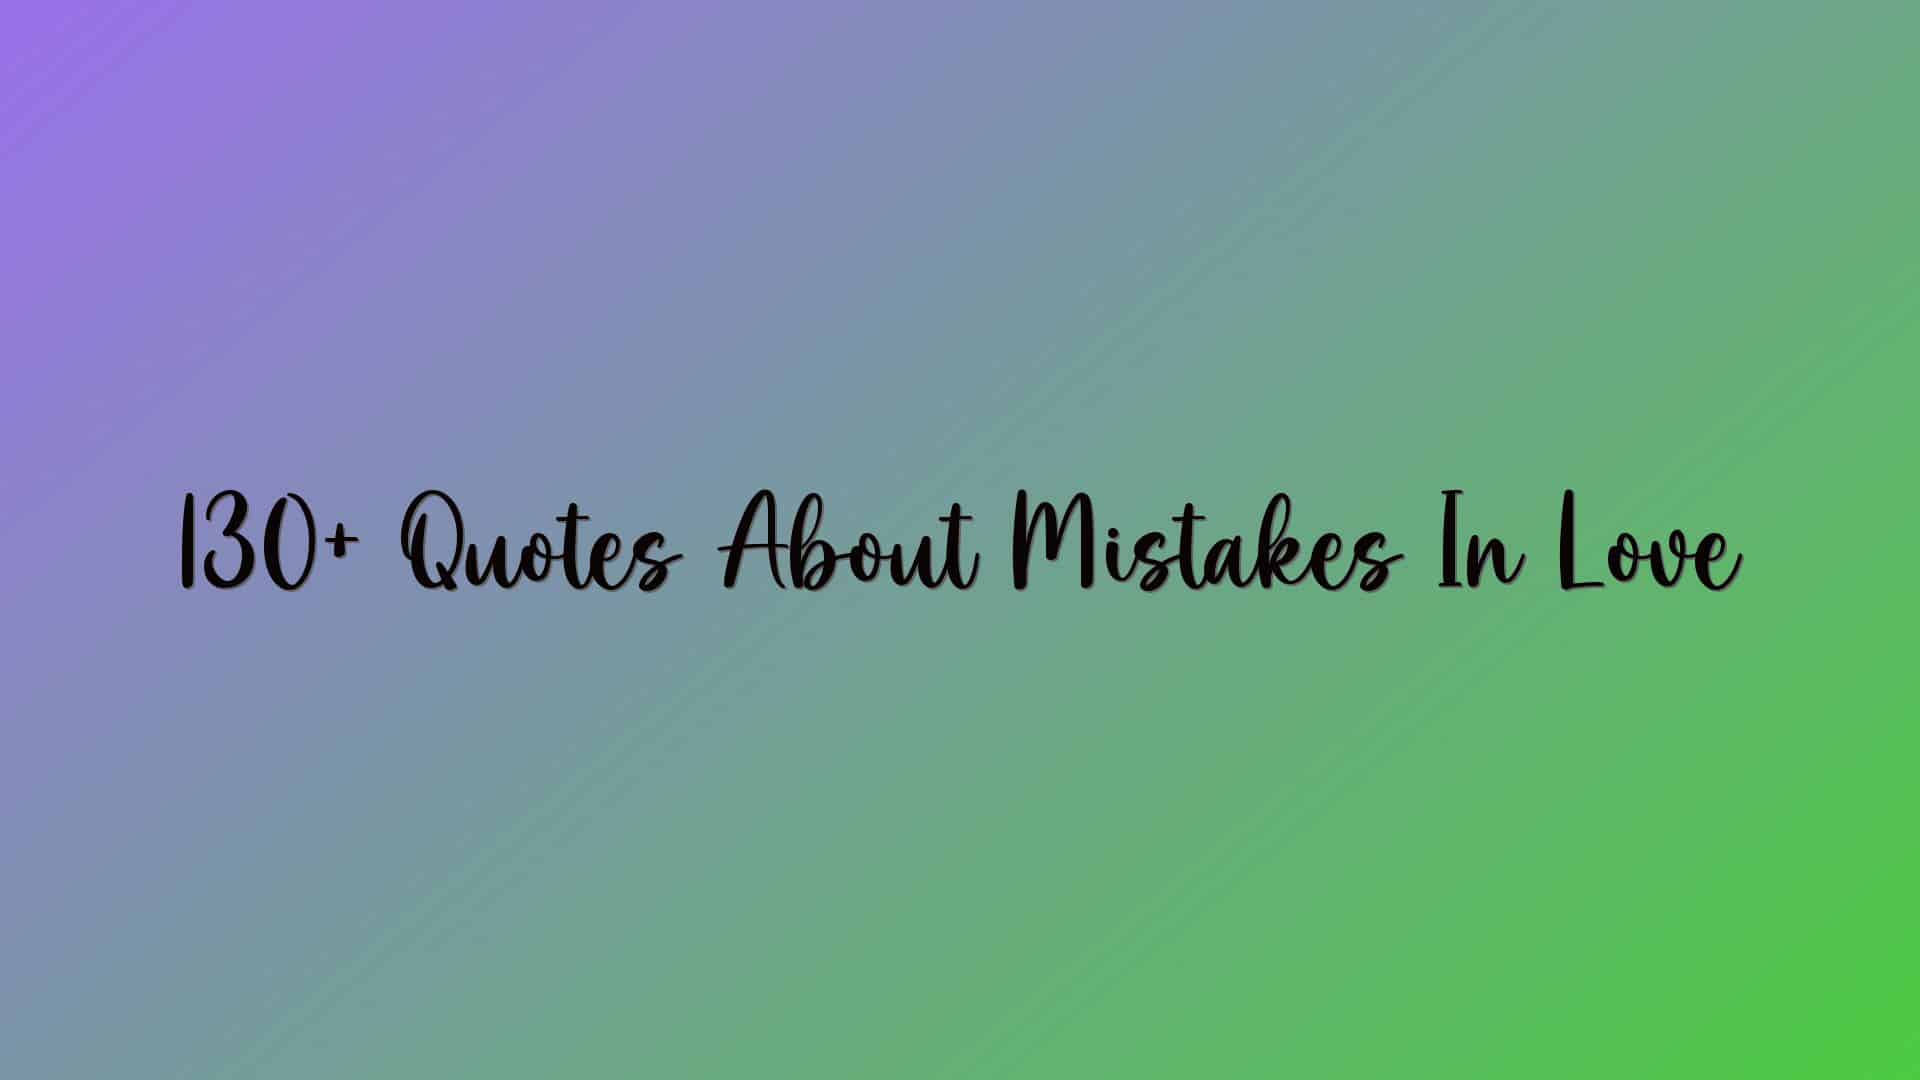 130+ Quotes About Mistakes In Love